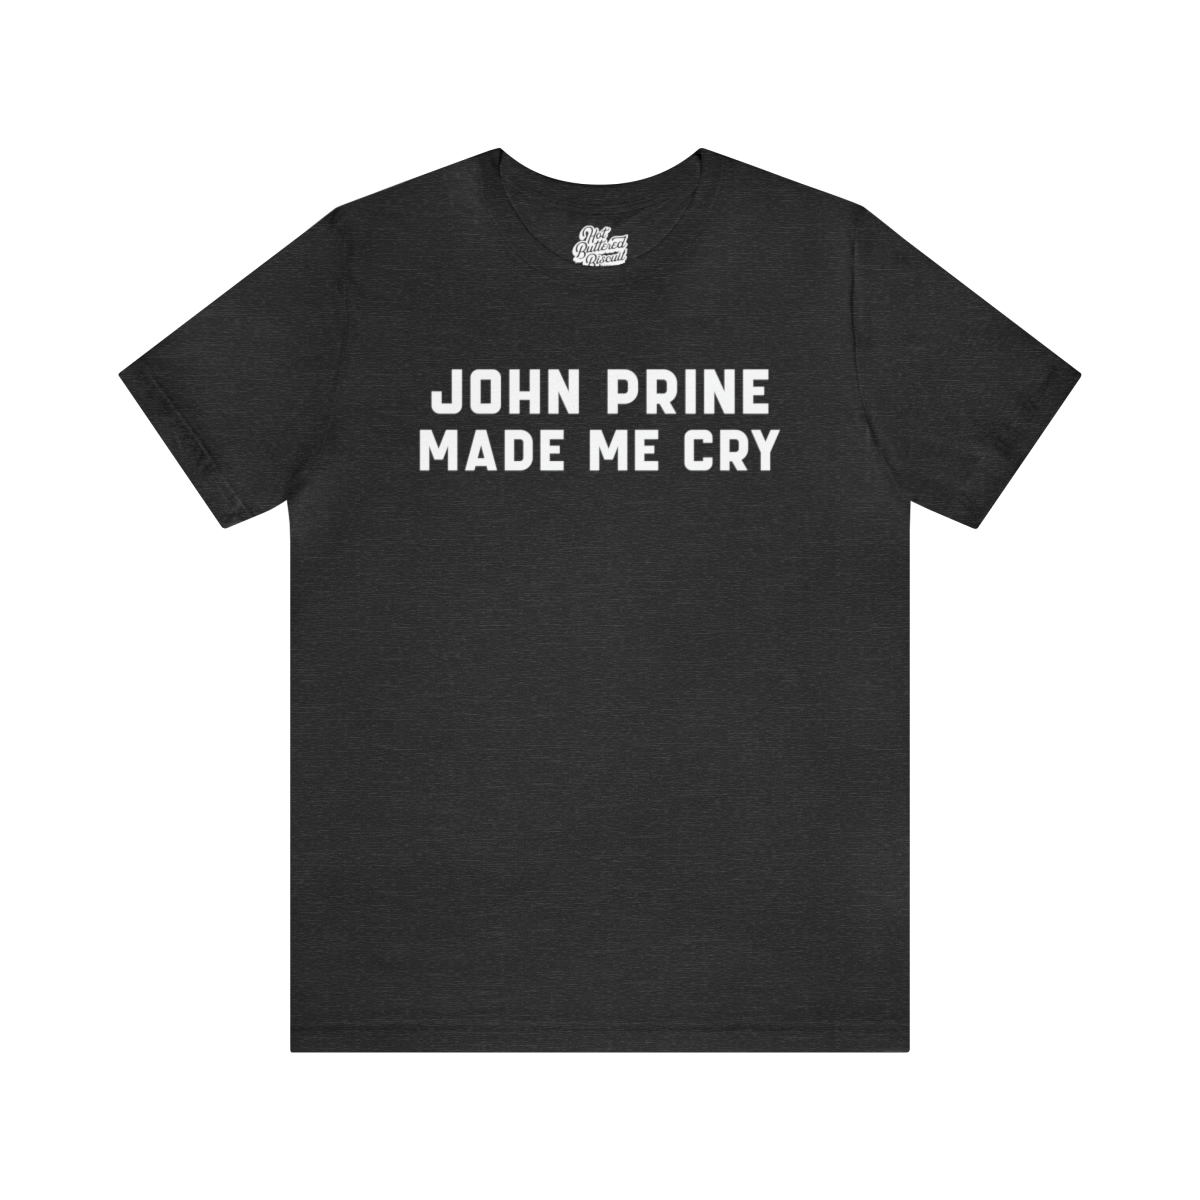 If a John Prine song hasn’t brought you to tears, you’re missing out on an important southen rite of passage.  Often called the “Mark Twain of Songwriting”, John Prine’s phrasing…